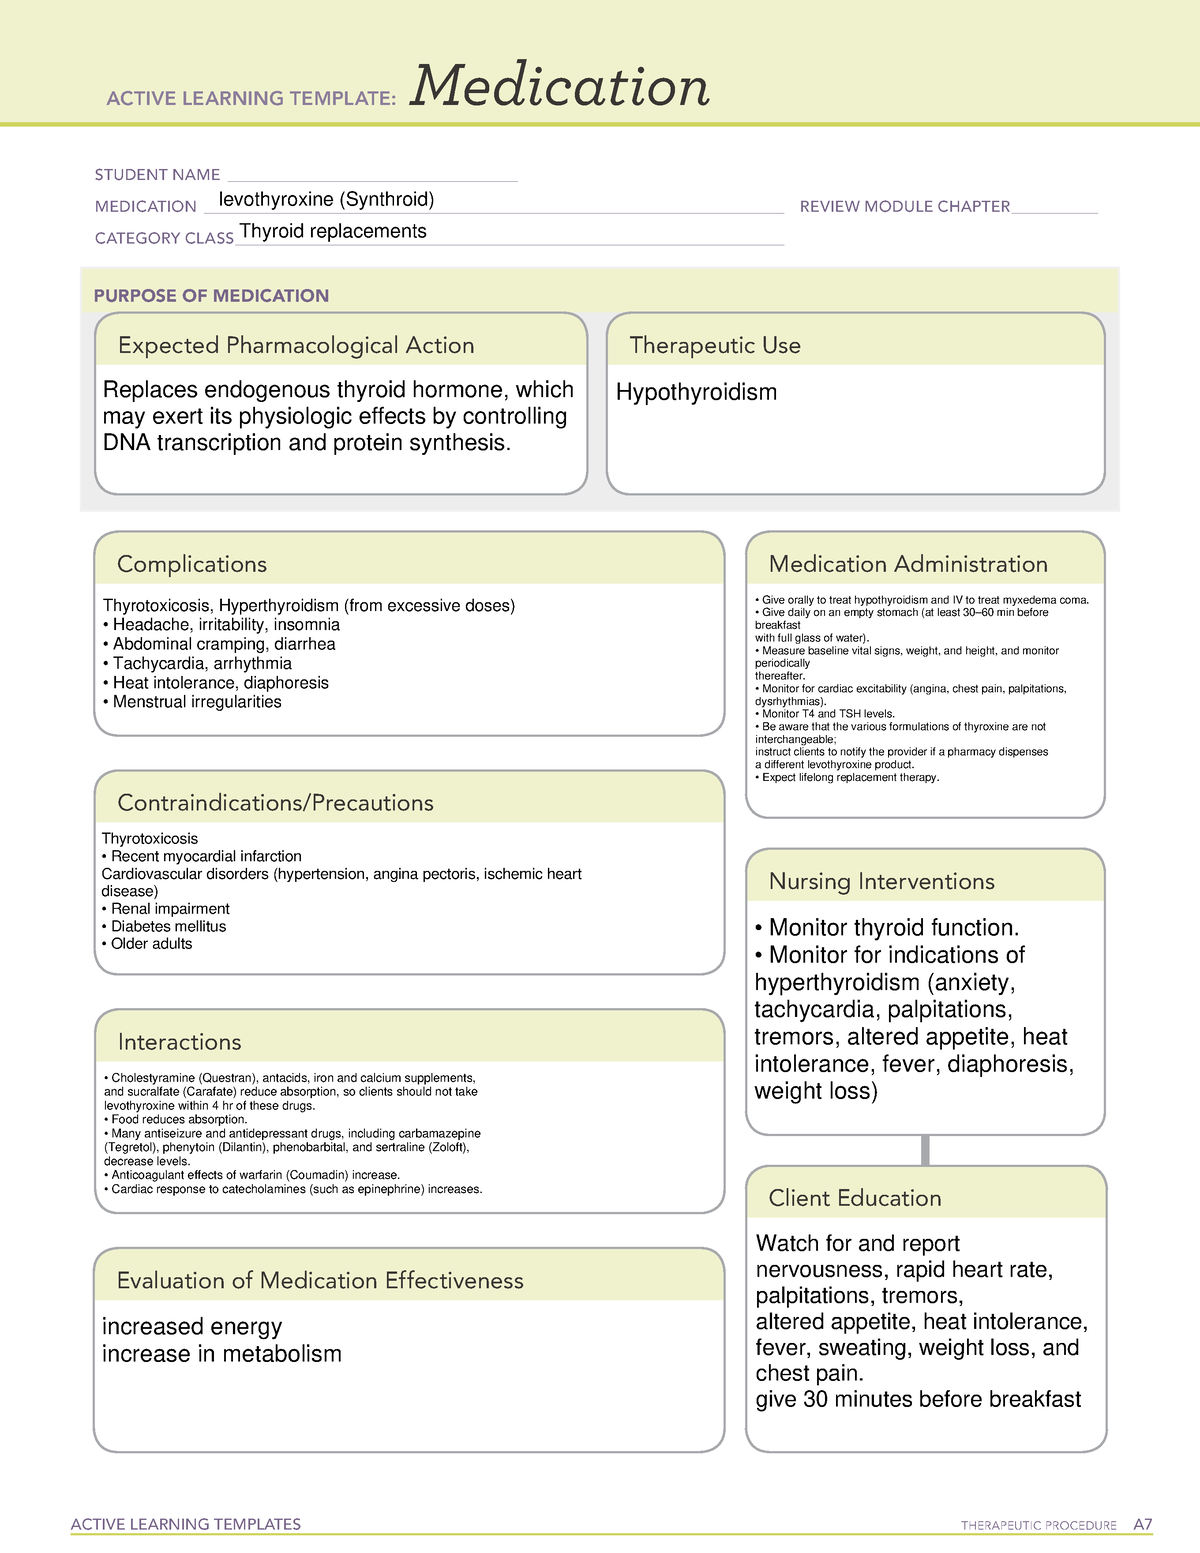 ATI pharmacology med template Levothyroxine ACTIVE LEARNING